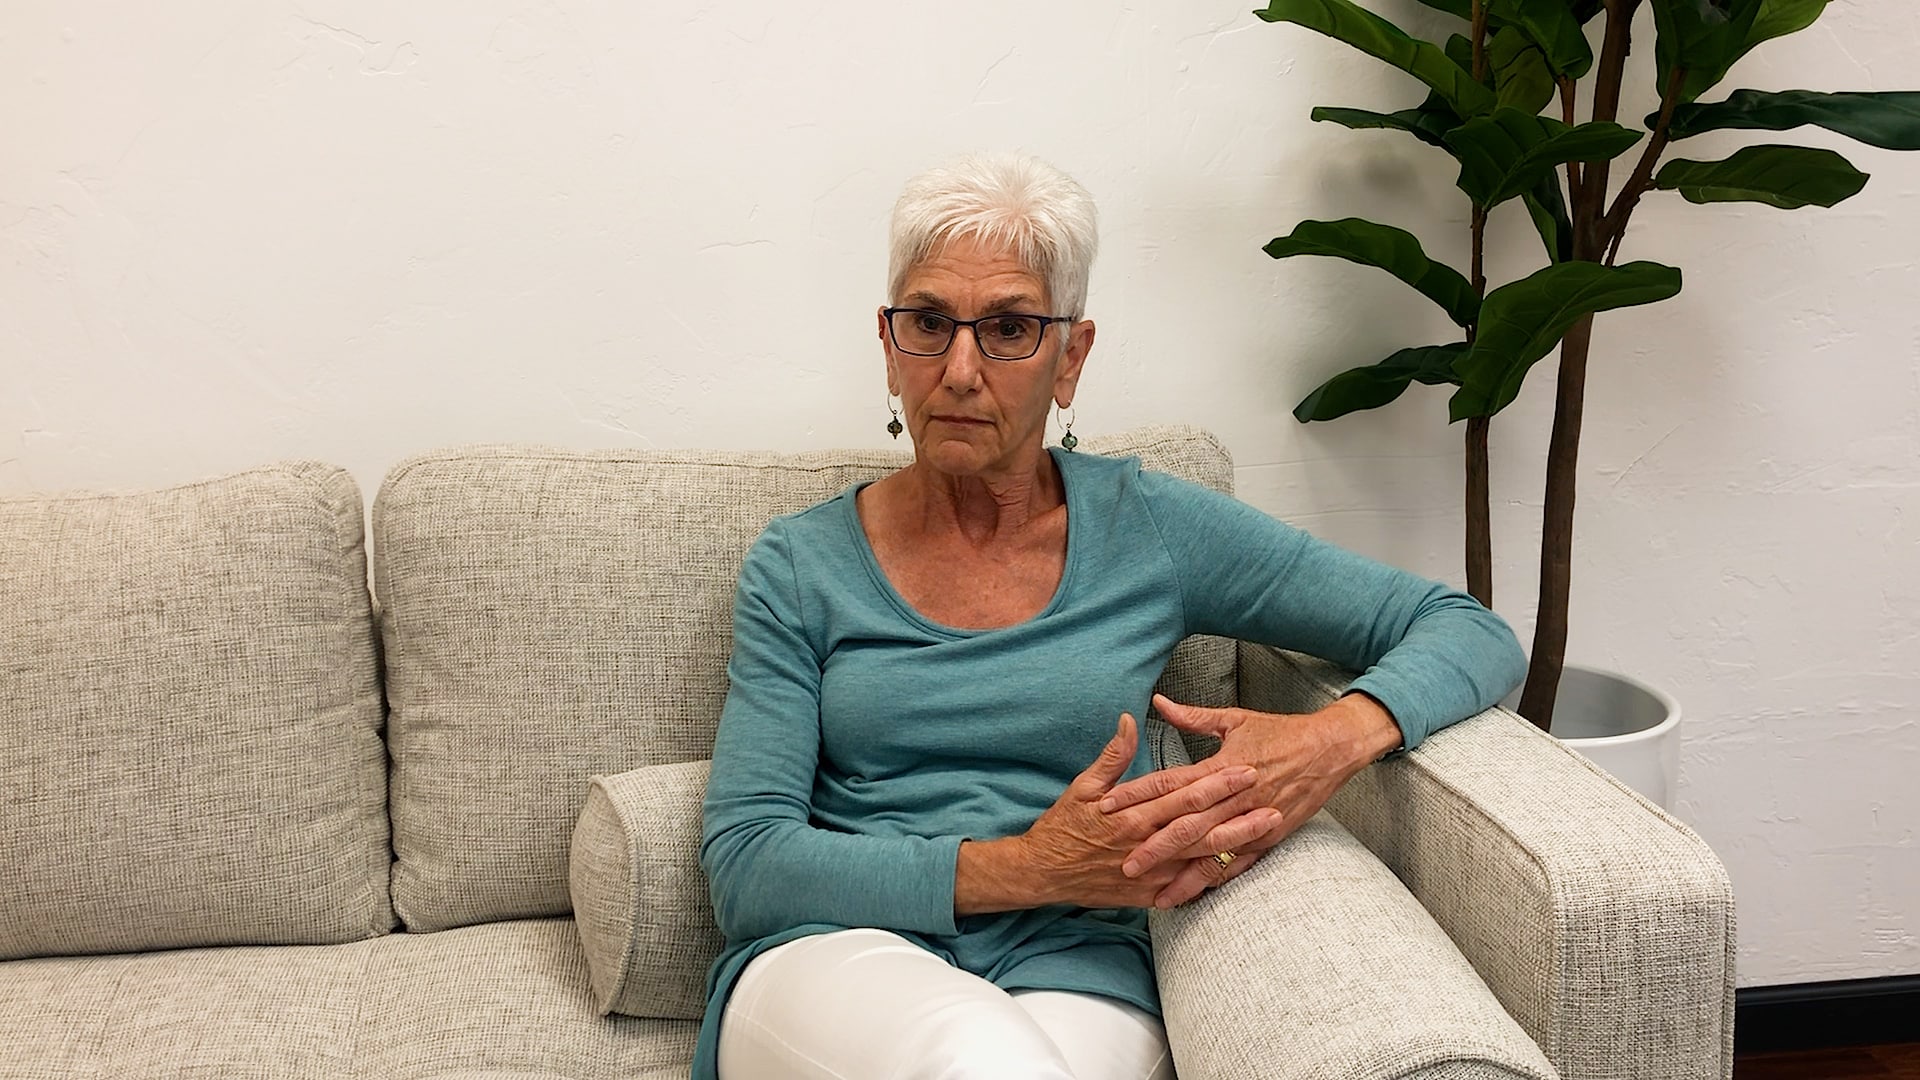 Psychologist Roz Kalb sitting on couch